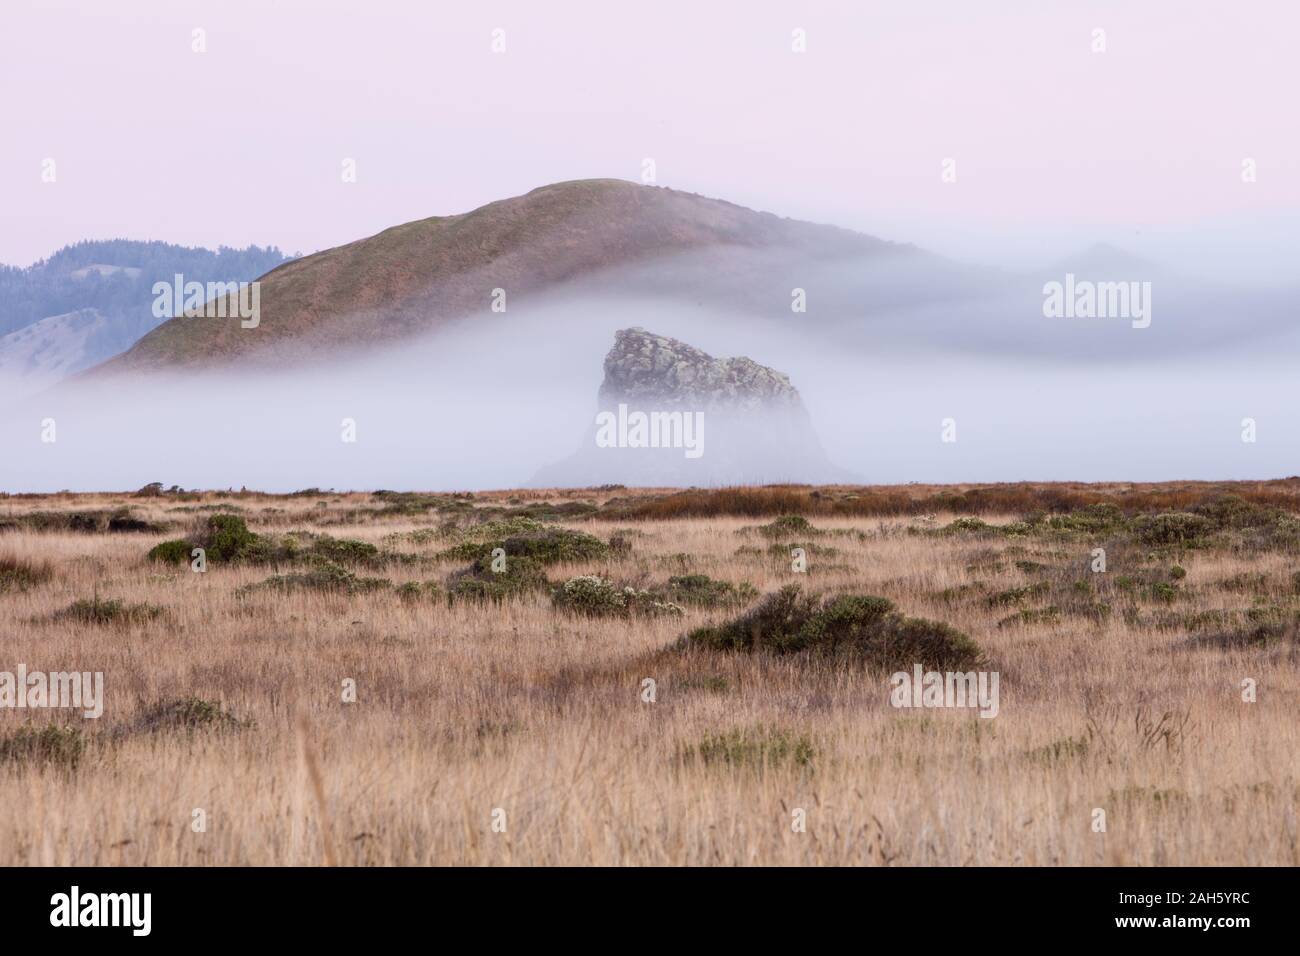 Morning mist flows over the rugged landscape of northern California in Sonoma. This scenic region is often covered by a thick marine layer of mist. Stock Photo